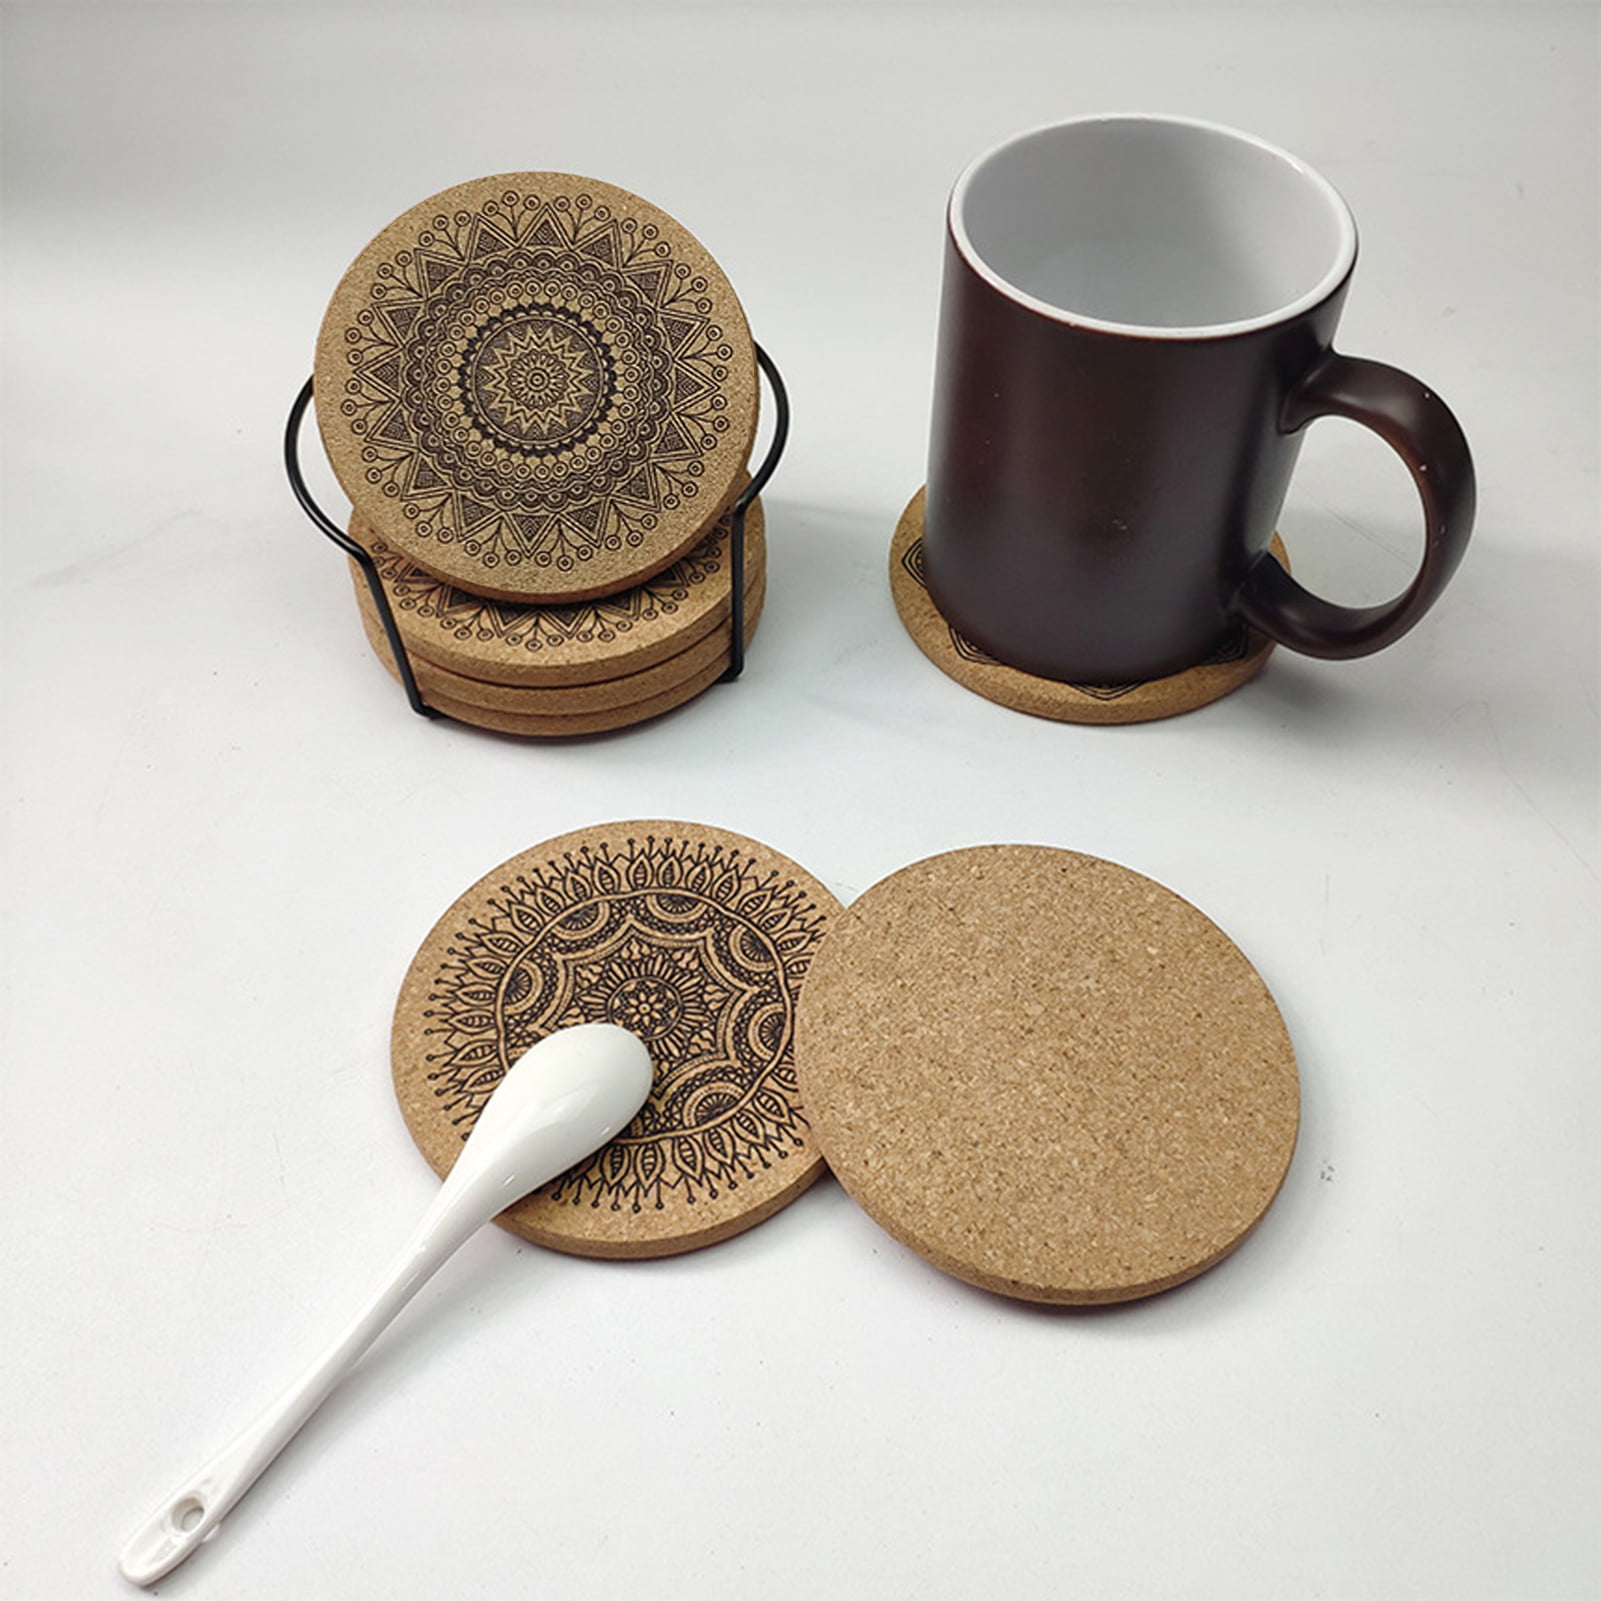 YHCORK Cork Coasters Pack of 50, Absorbing Heat Resistant Reusable Tea or Coffee Coaster, Blank Coasters for Crafts,Warm Gifts Cork Coasters for